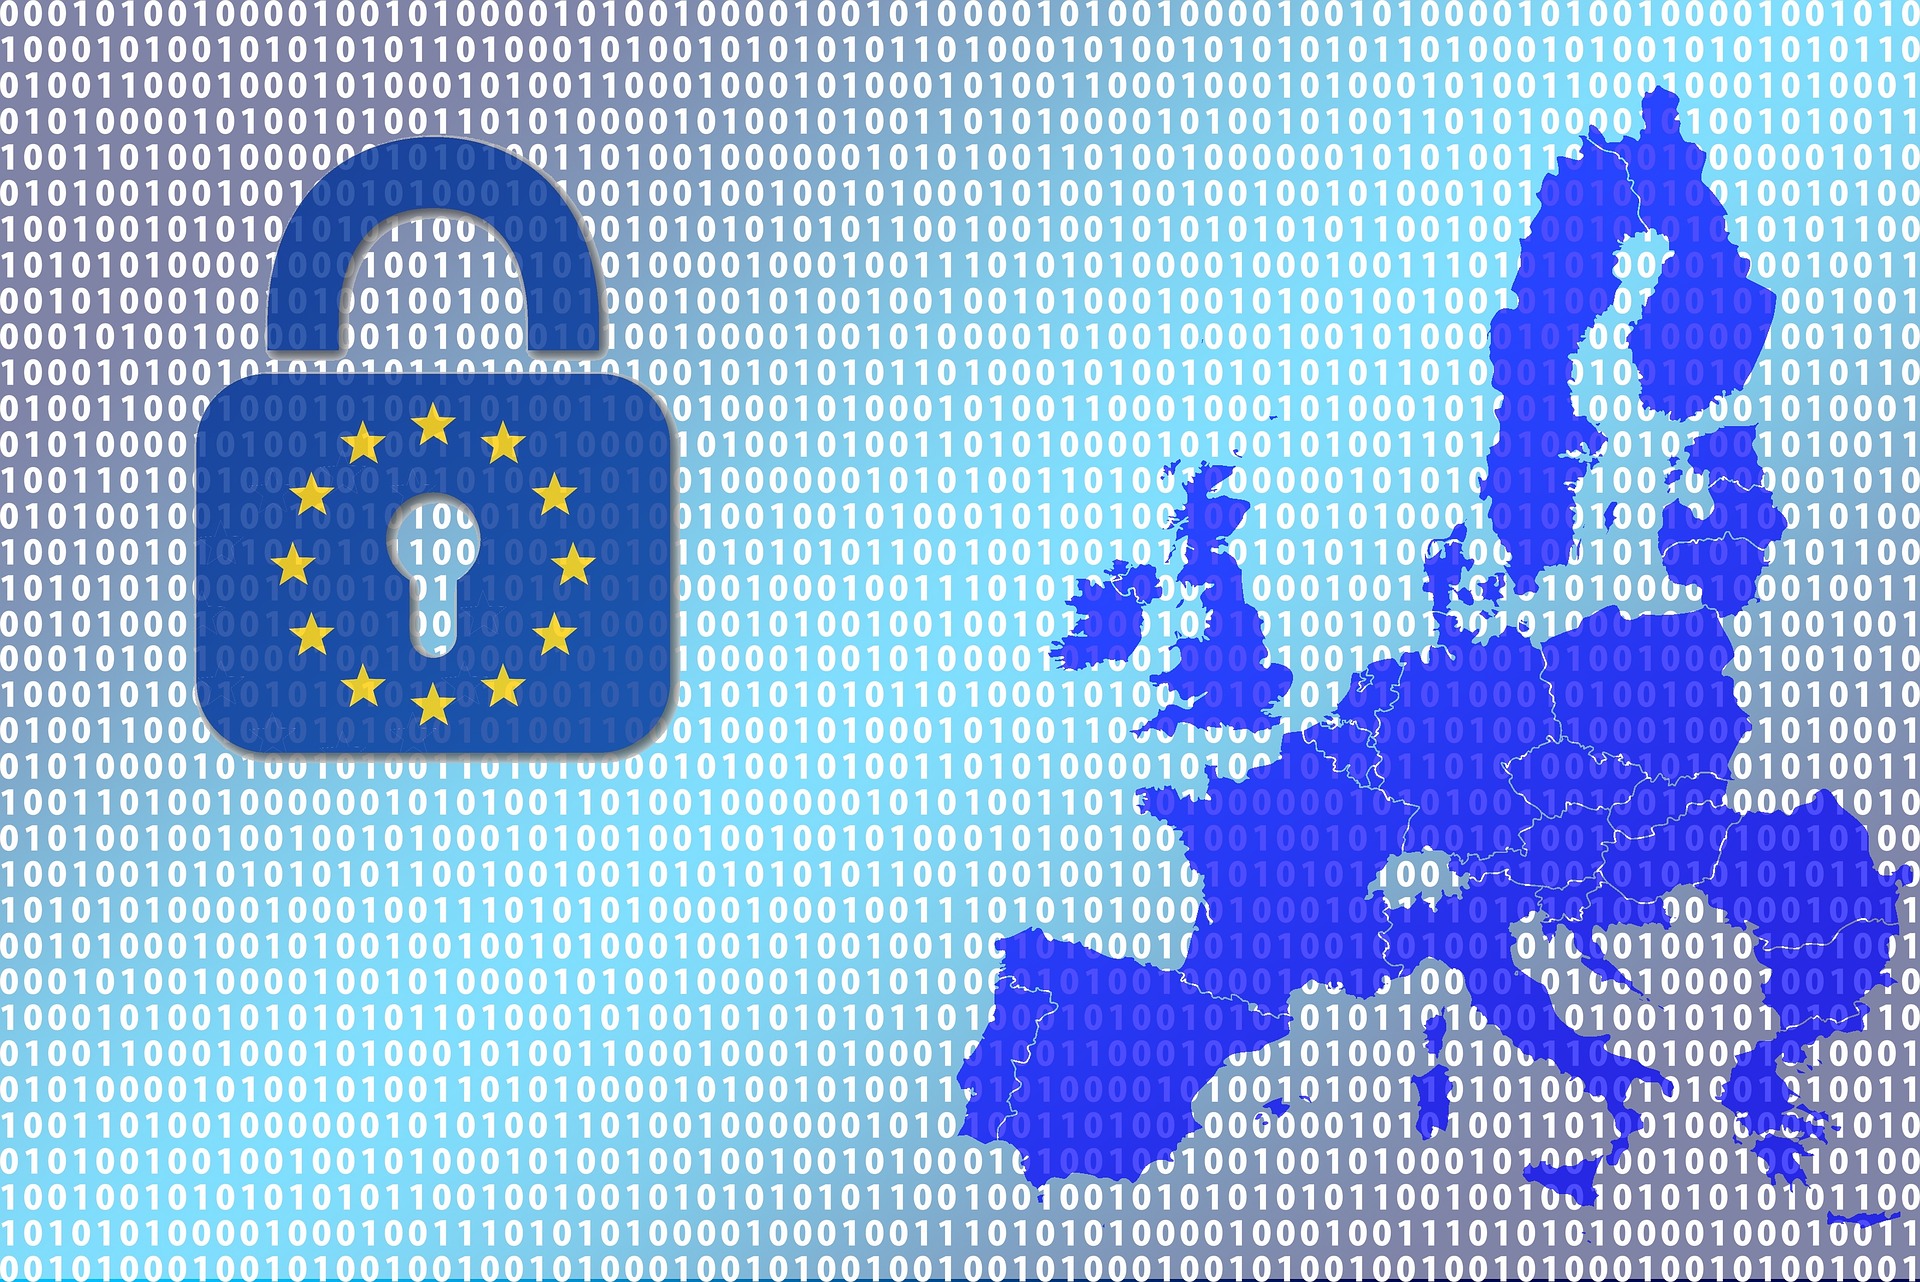 Changes in the EU digital health and data protection in 2015